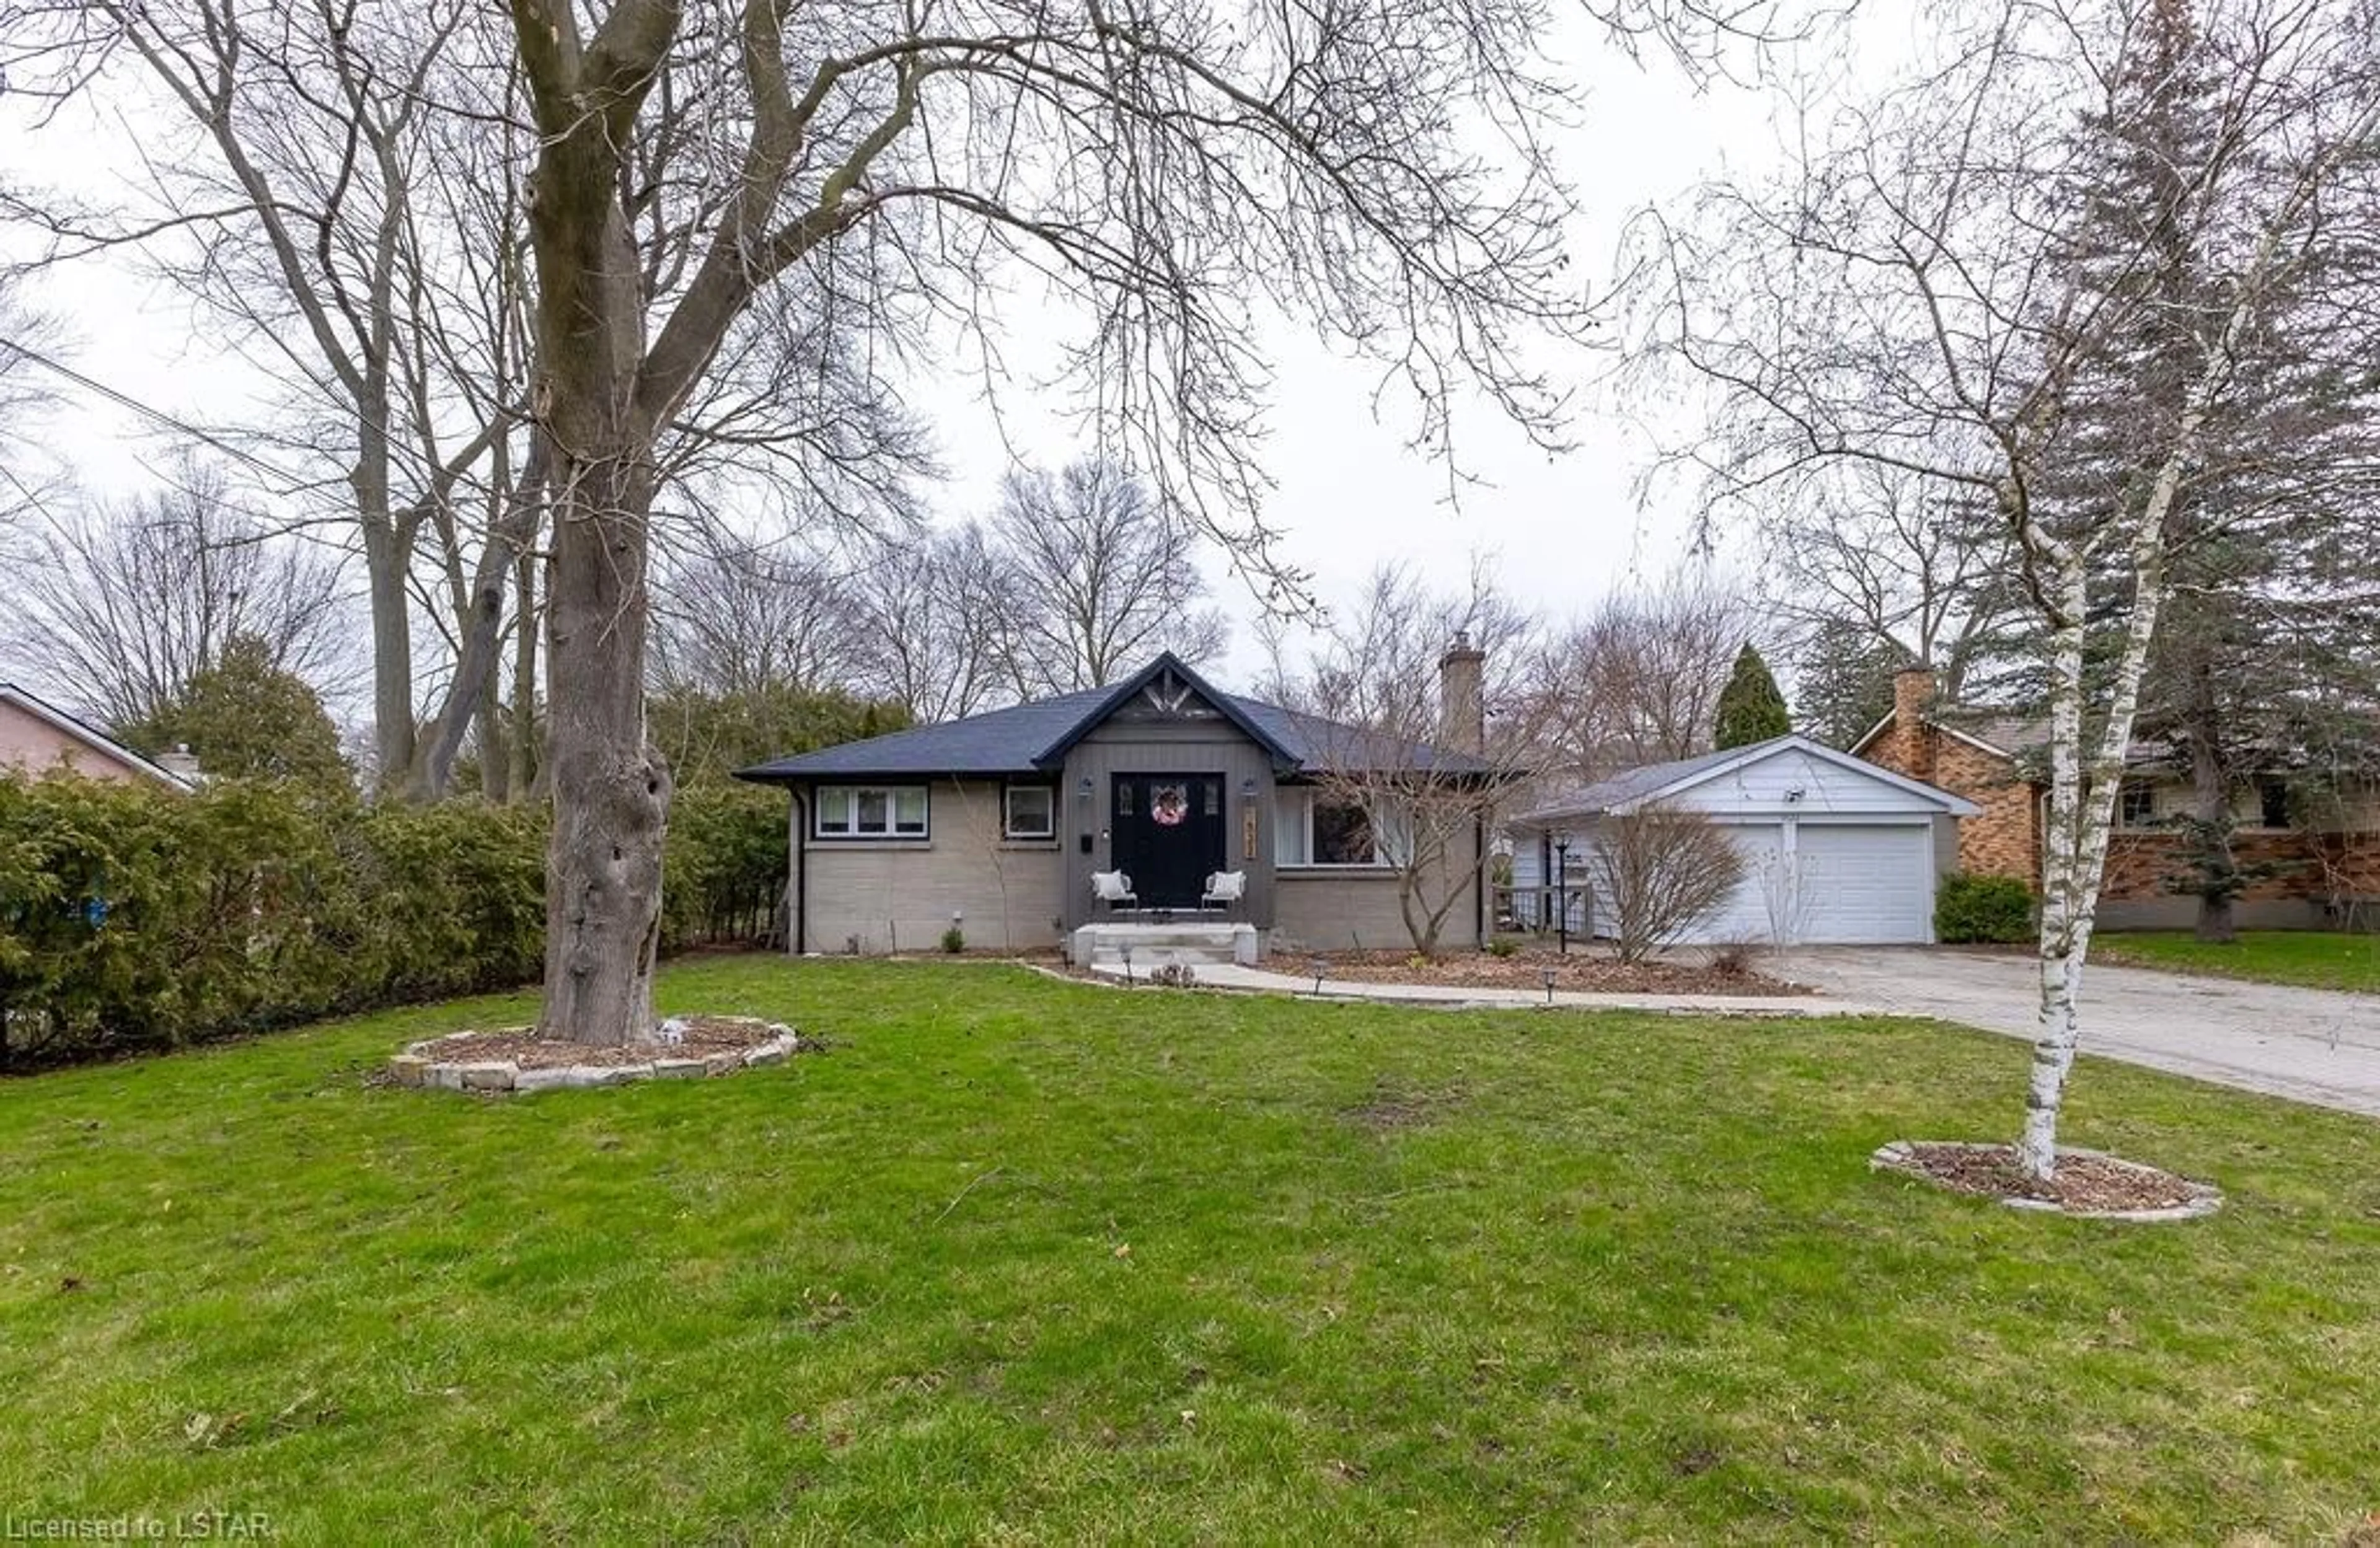 Frontside or backside of a home for 1522 Fremont Ave, London Ontario N5X 1N9